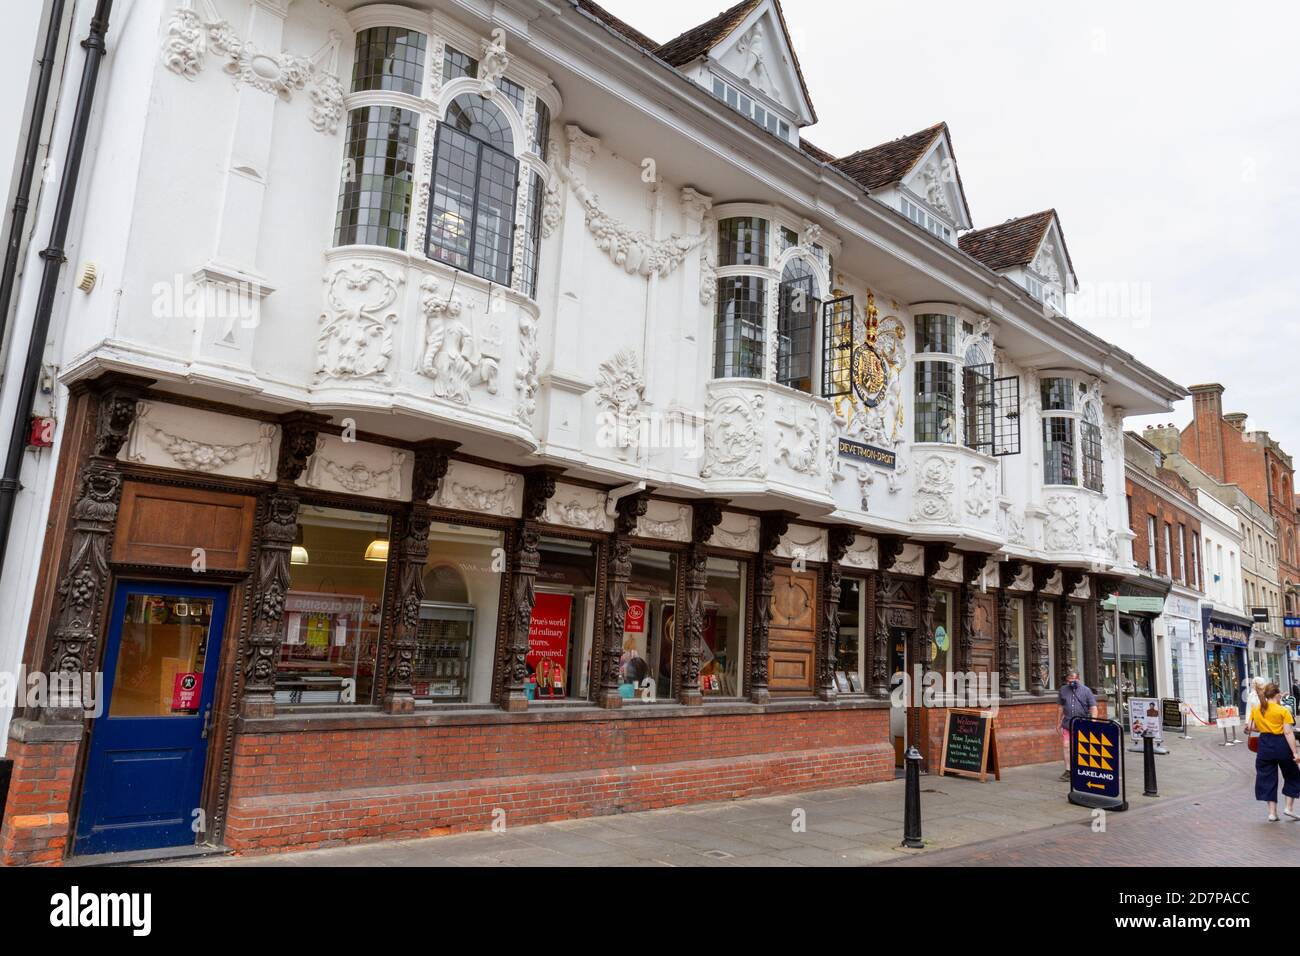 The Ancient House, (also known as Sparrowe's House), a Grade I listed building on Buttermarket, Ipswich, Suffolk, UK. Stock Photo